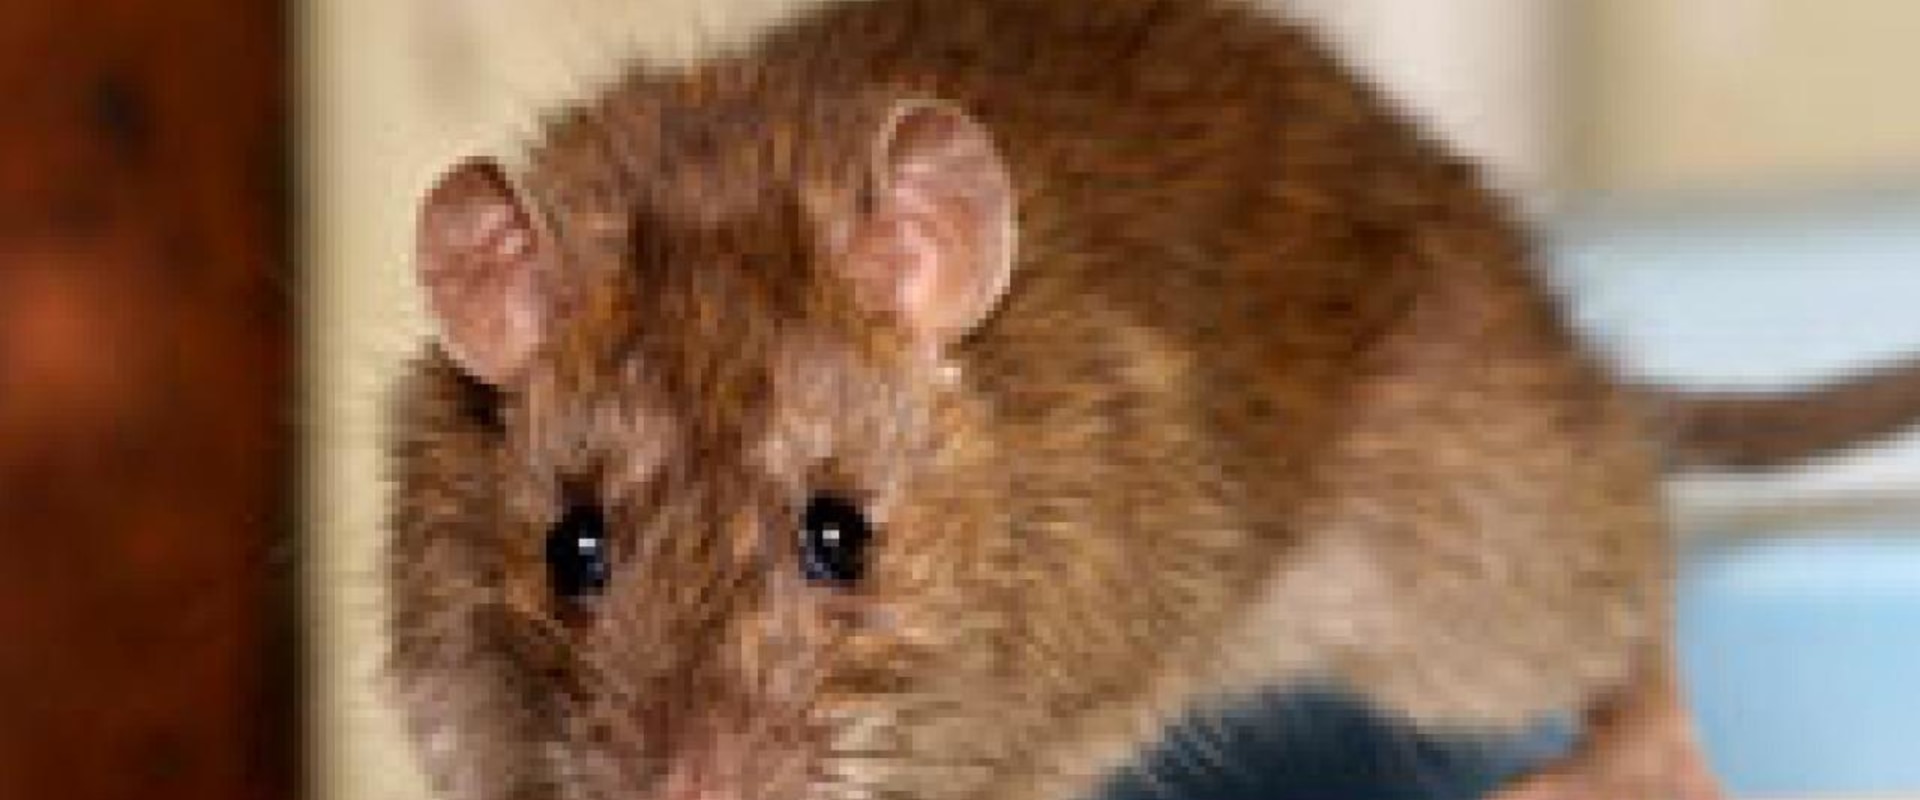 What are the 4 signs that rodents are present?